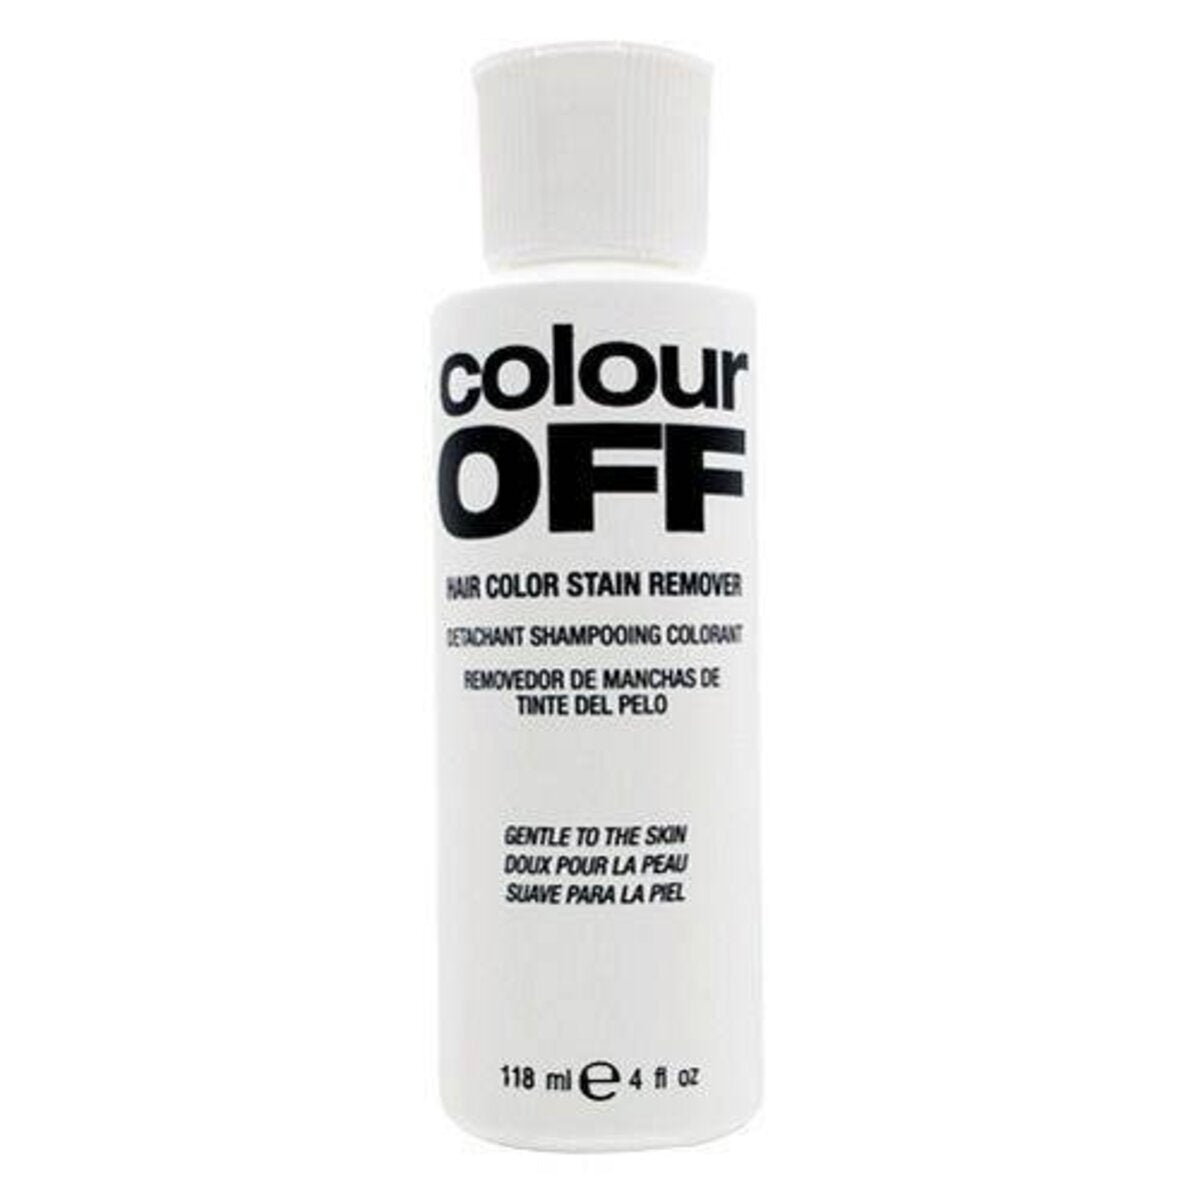 COLOUR OFF STAIN REMOVER COLOR SOLUTIONS - ARDELL